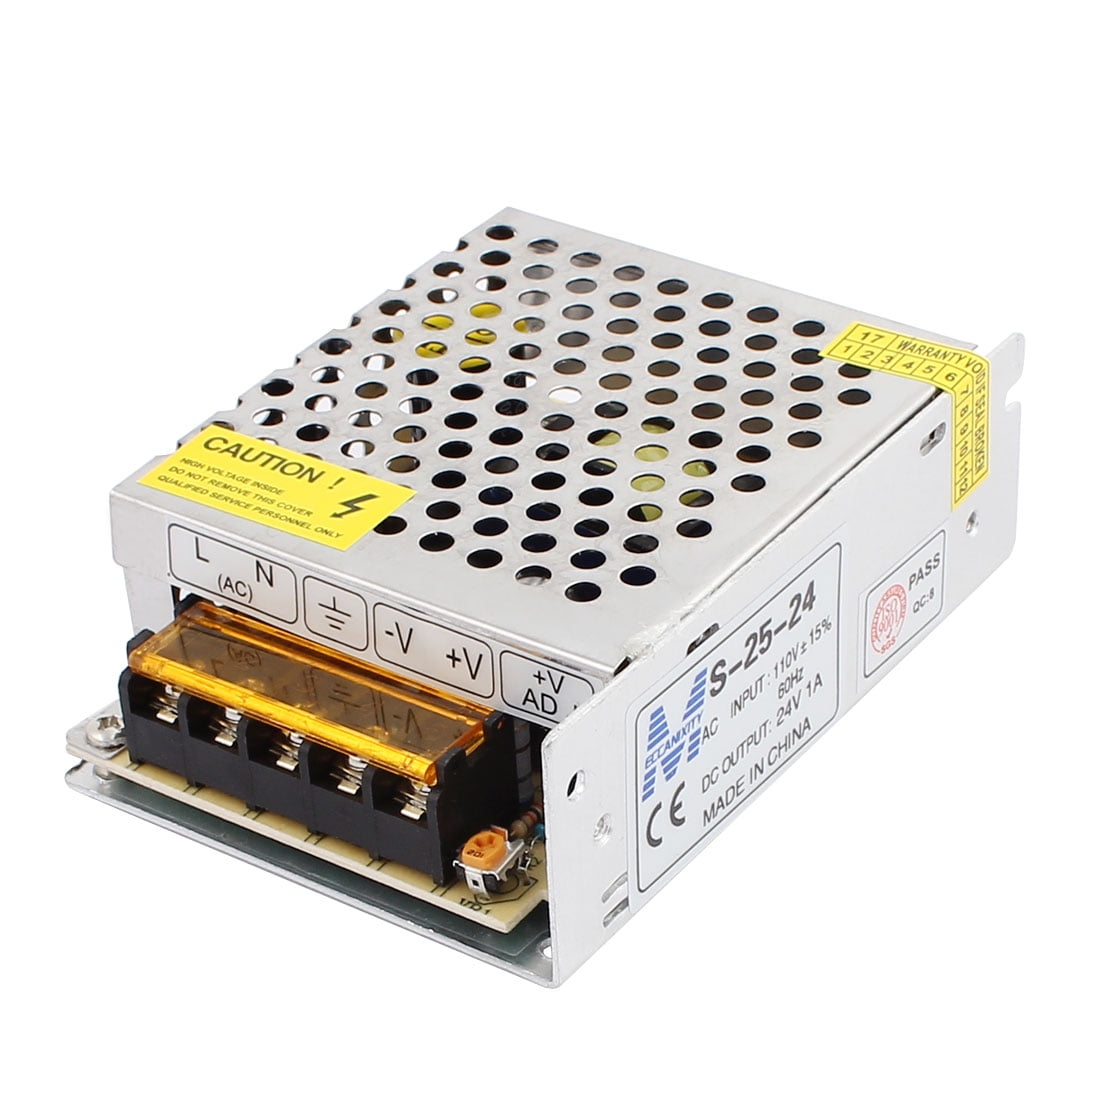 S 25 24 Switching Power Supply  Output DC 24V 1A for 